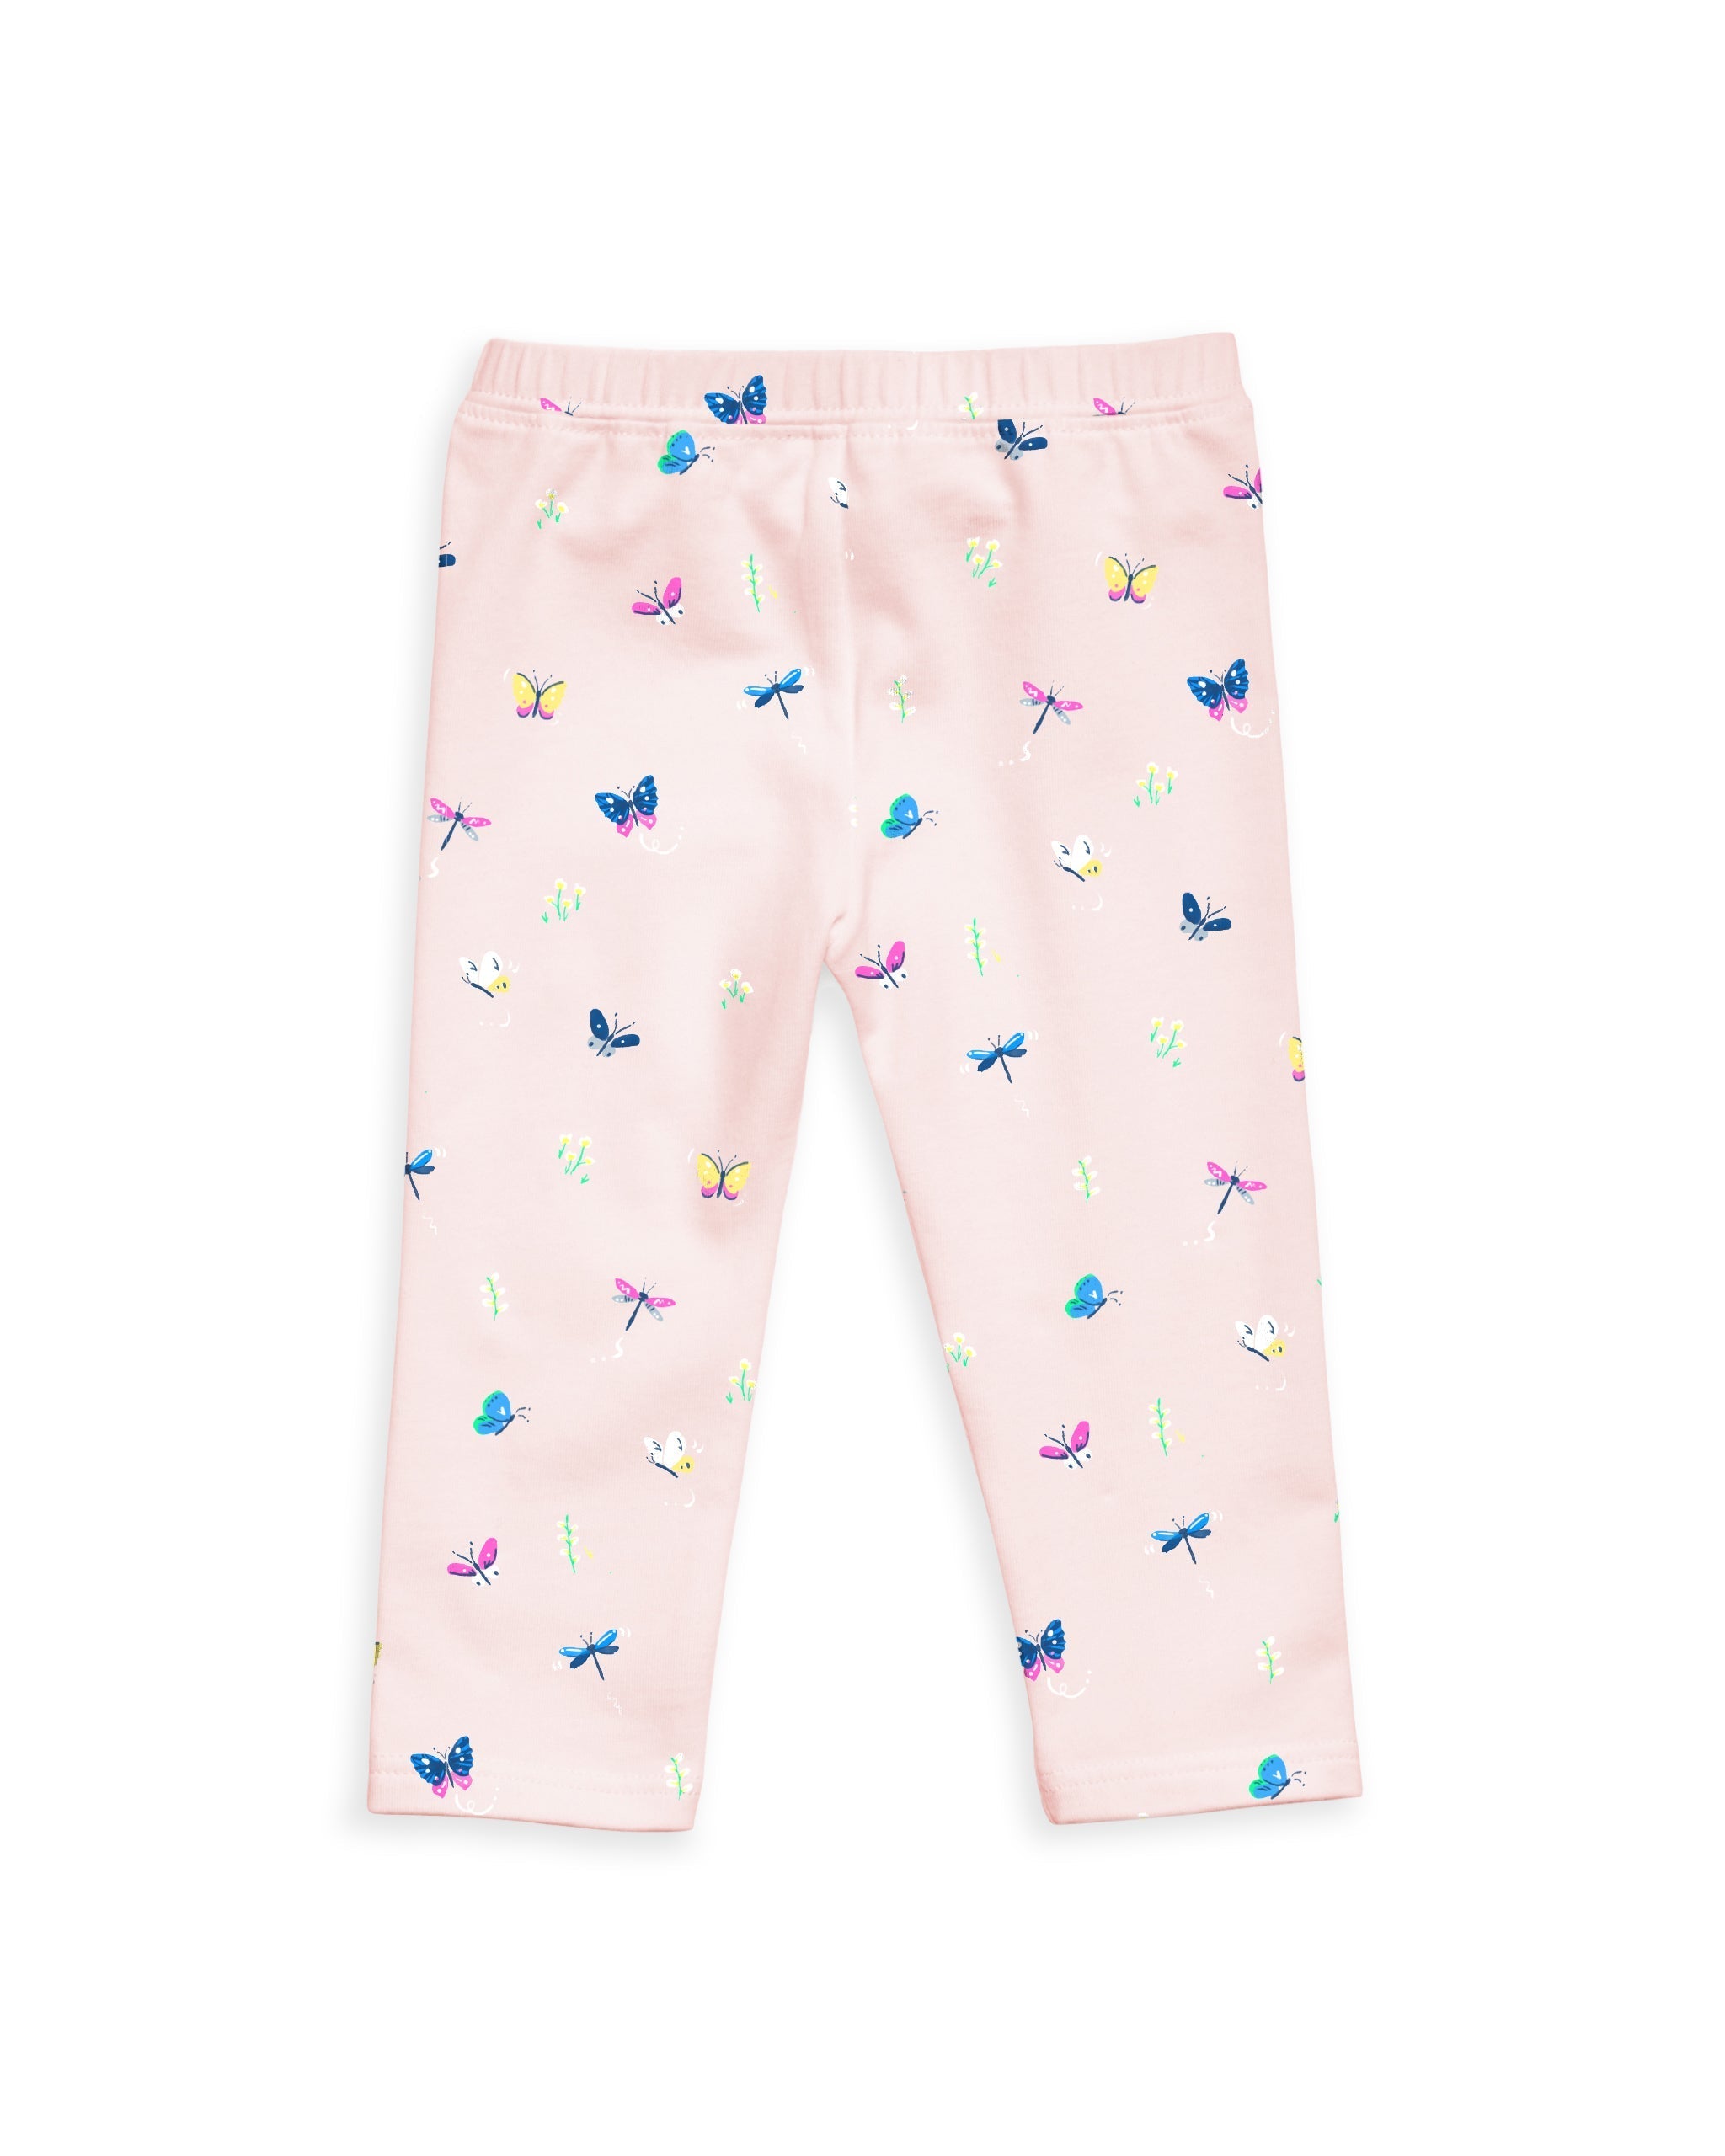 The Organic Printed Legging [Pink Neon Critters]